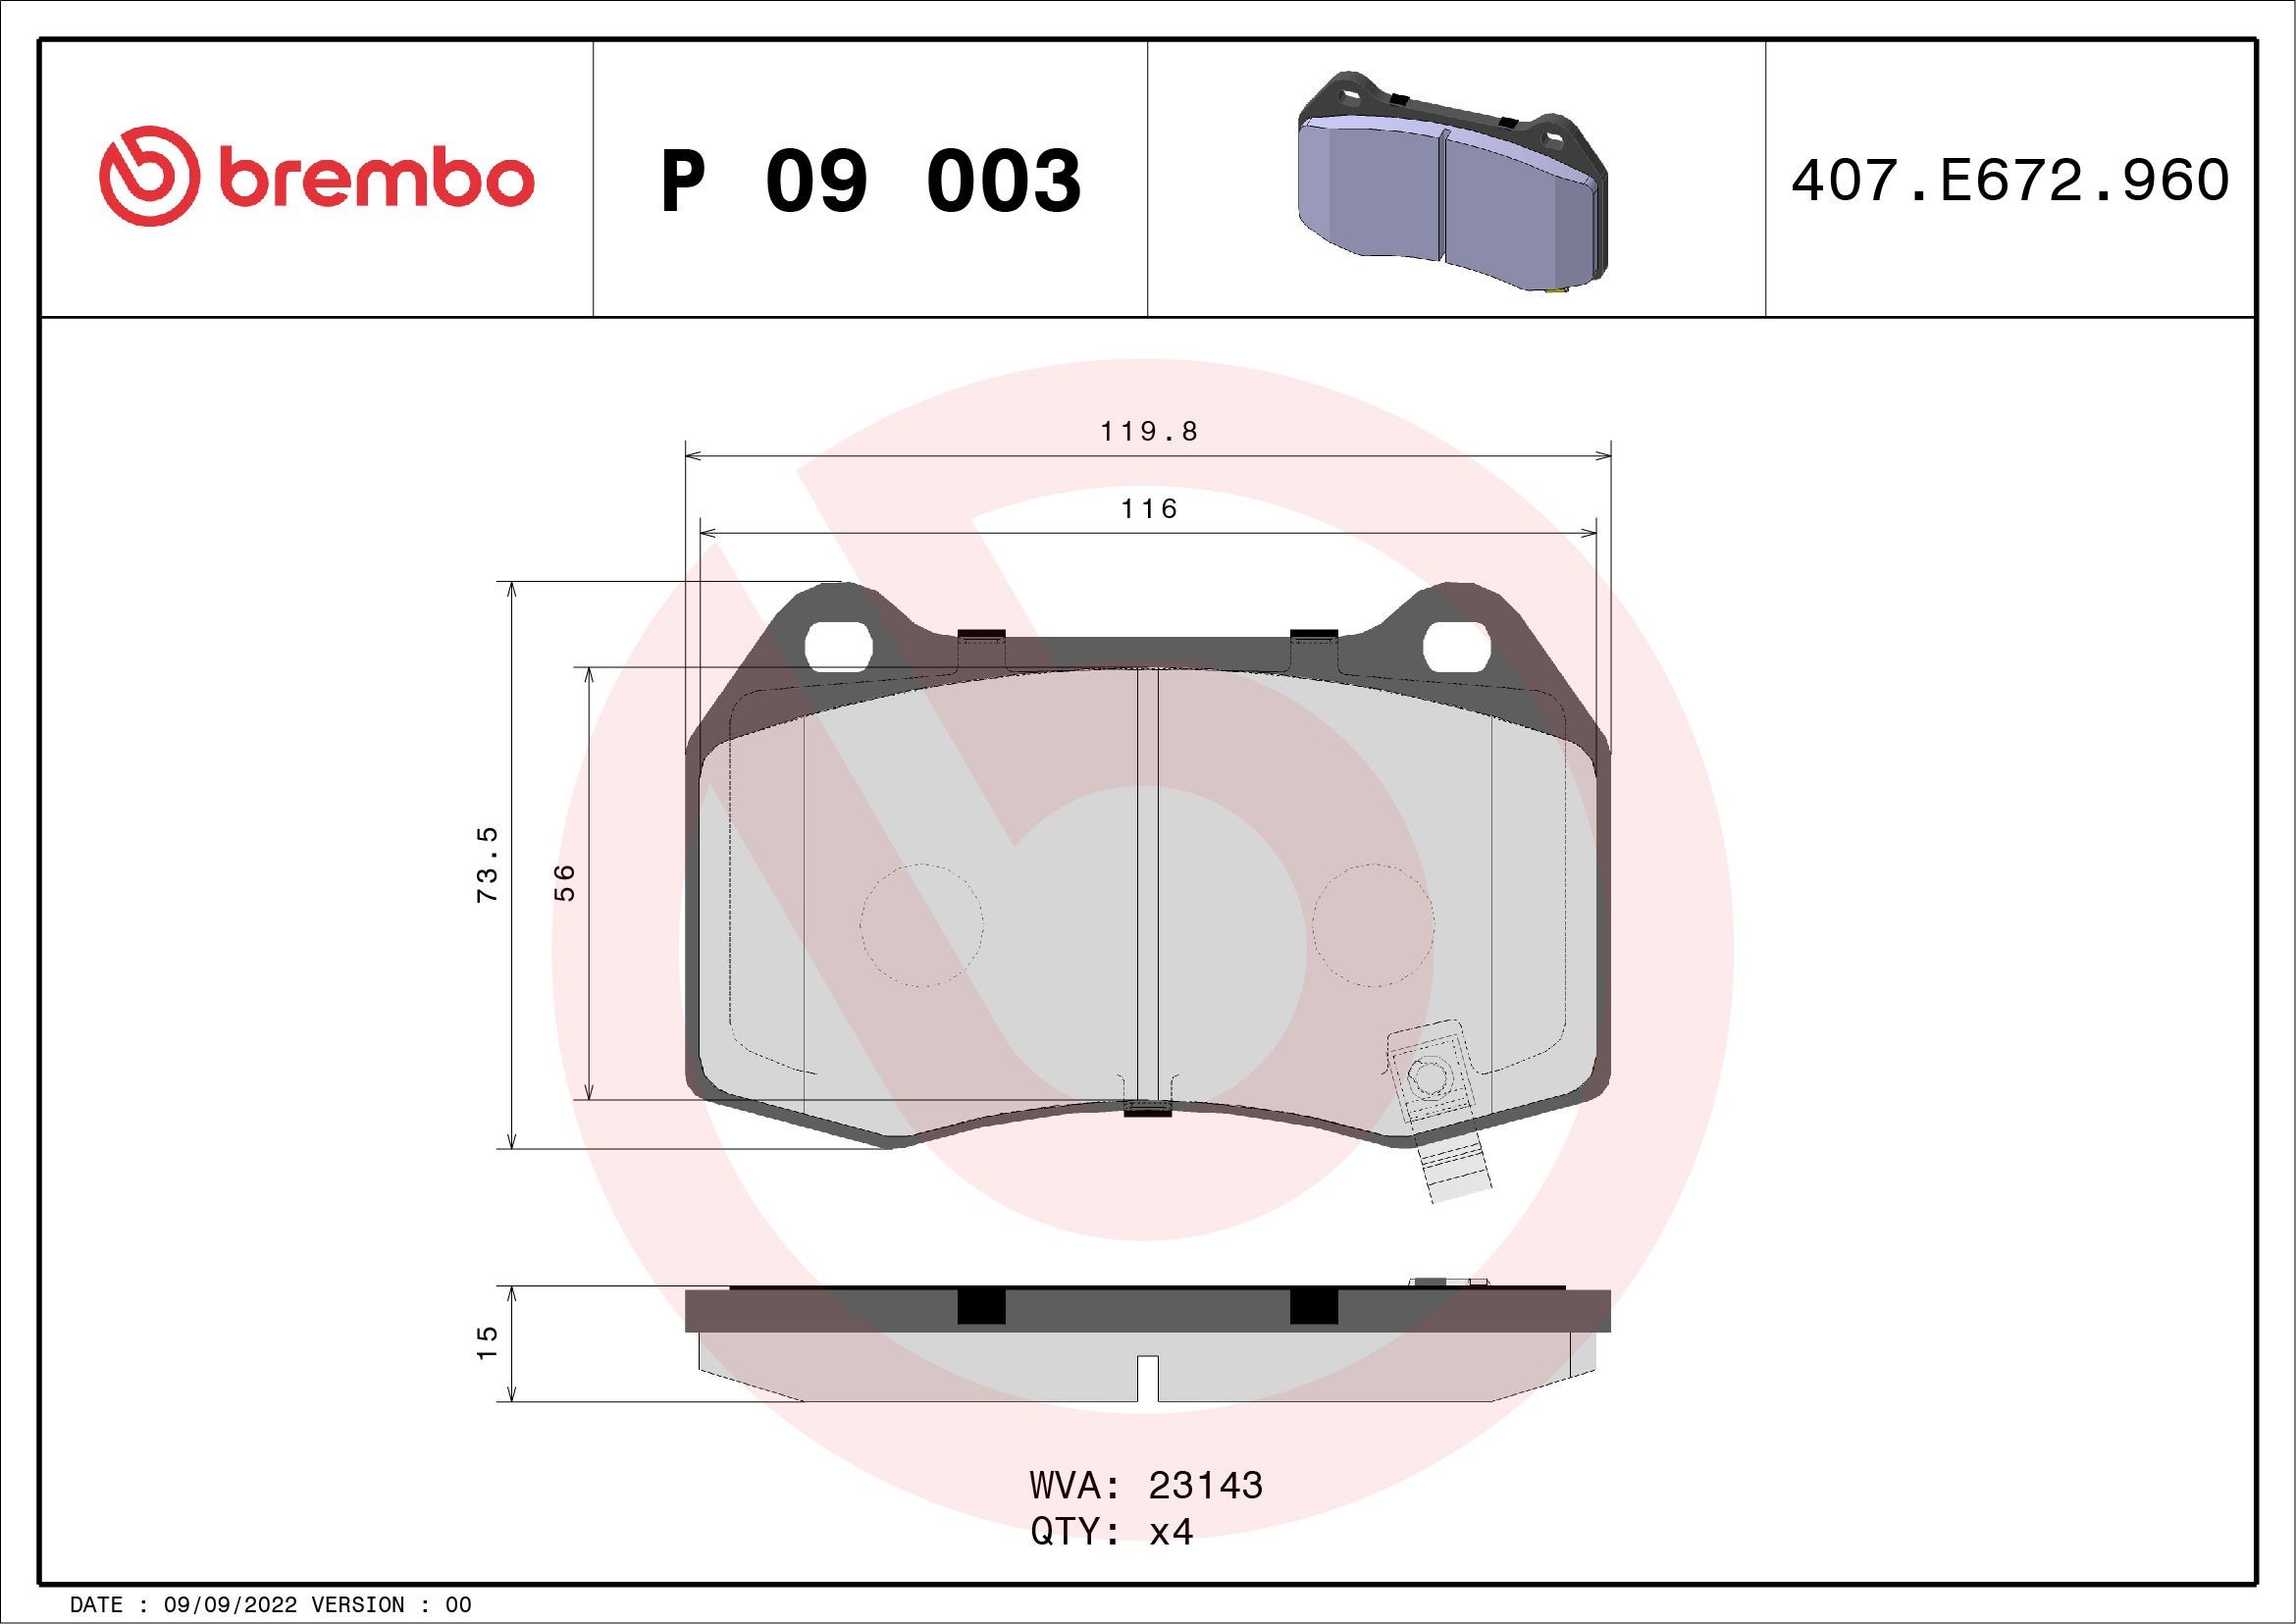 BREMBO P 09 003 Brake pad set with acoustic wear warning, without accessories